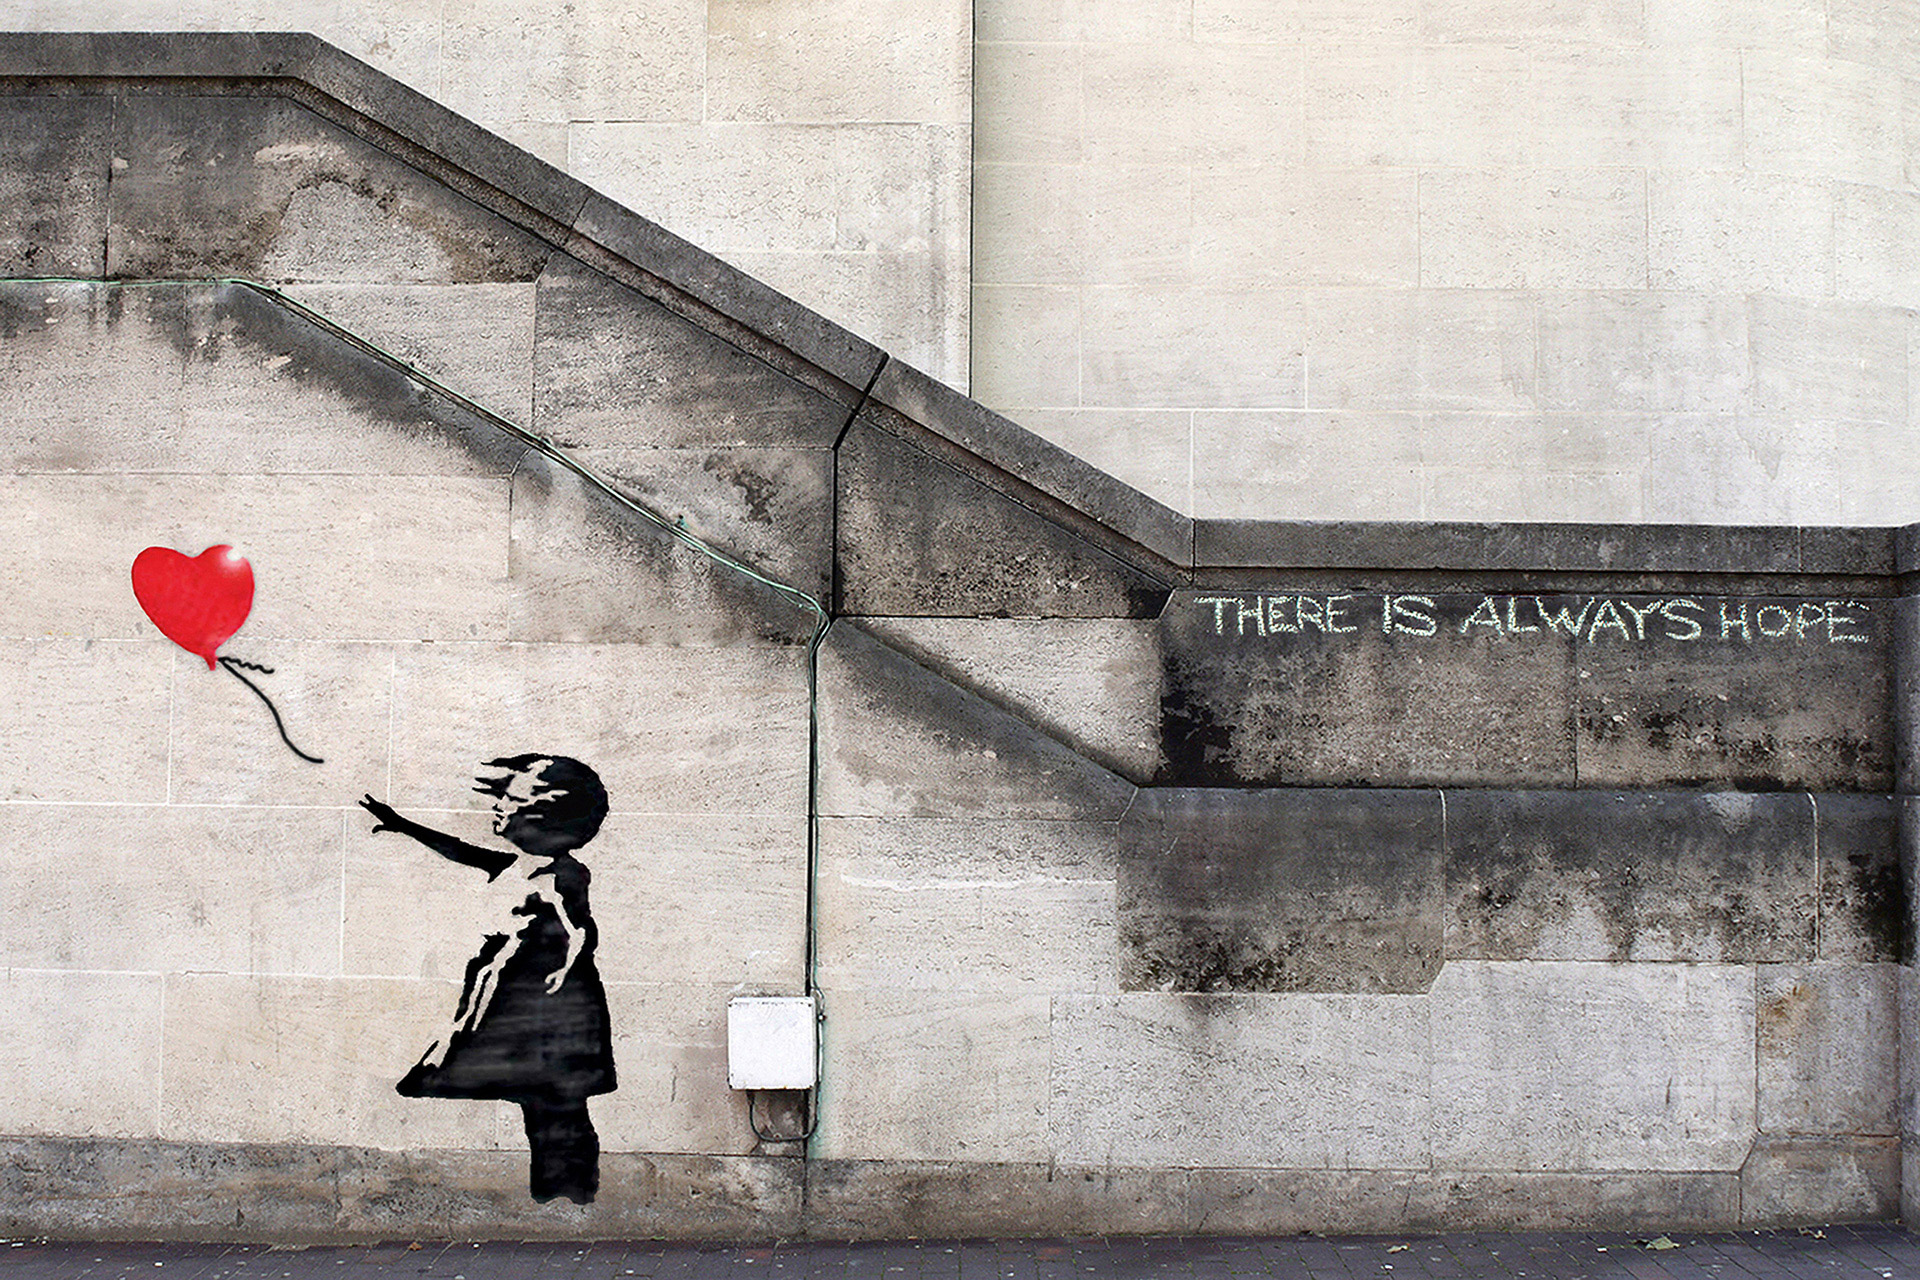 The Art Of Banksy: Without limits